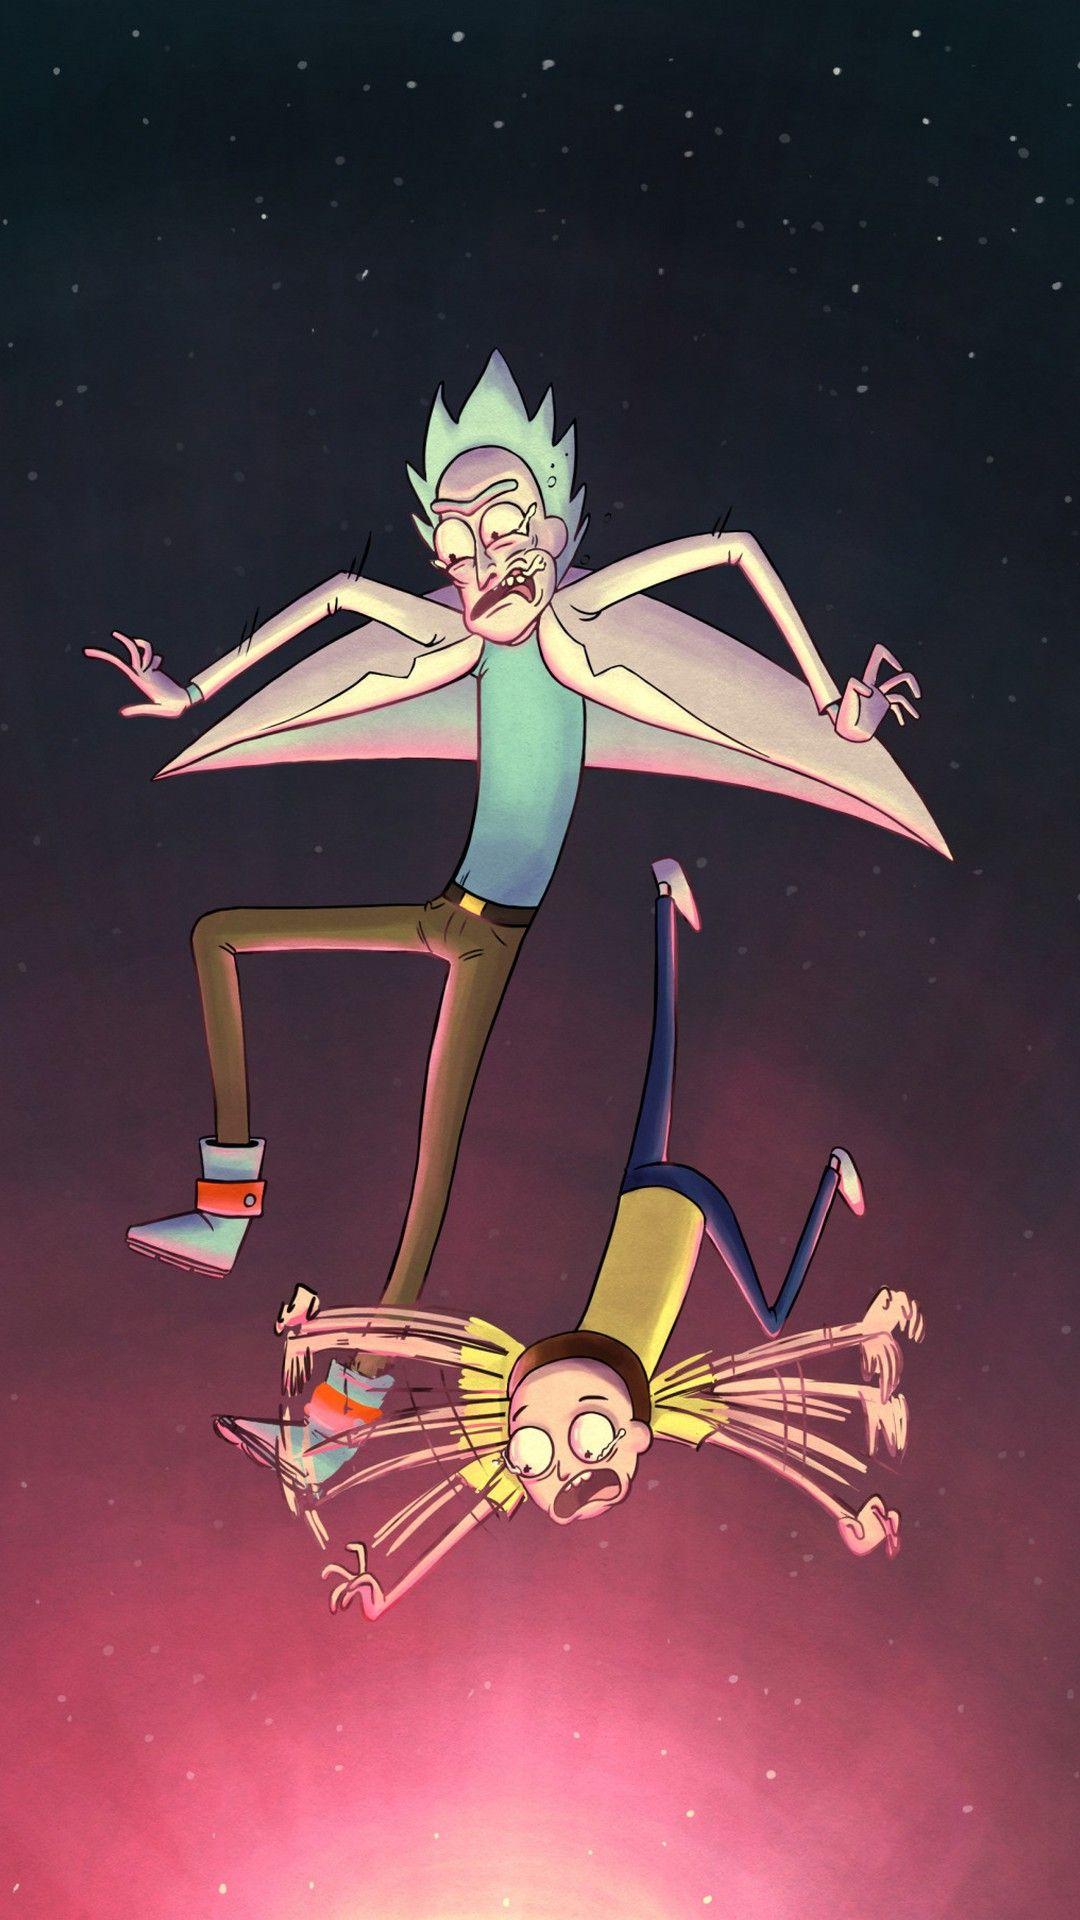 Wallpaper Rick and Morty iPhone. Rick i morty, Rick and morty, Morty